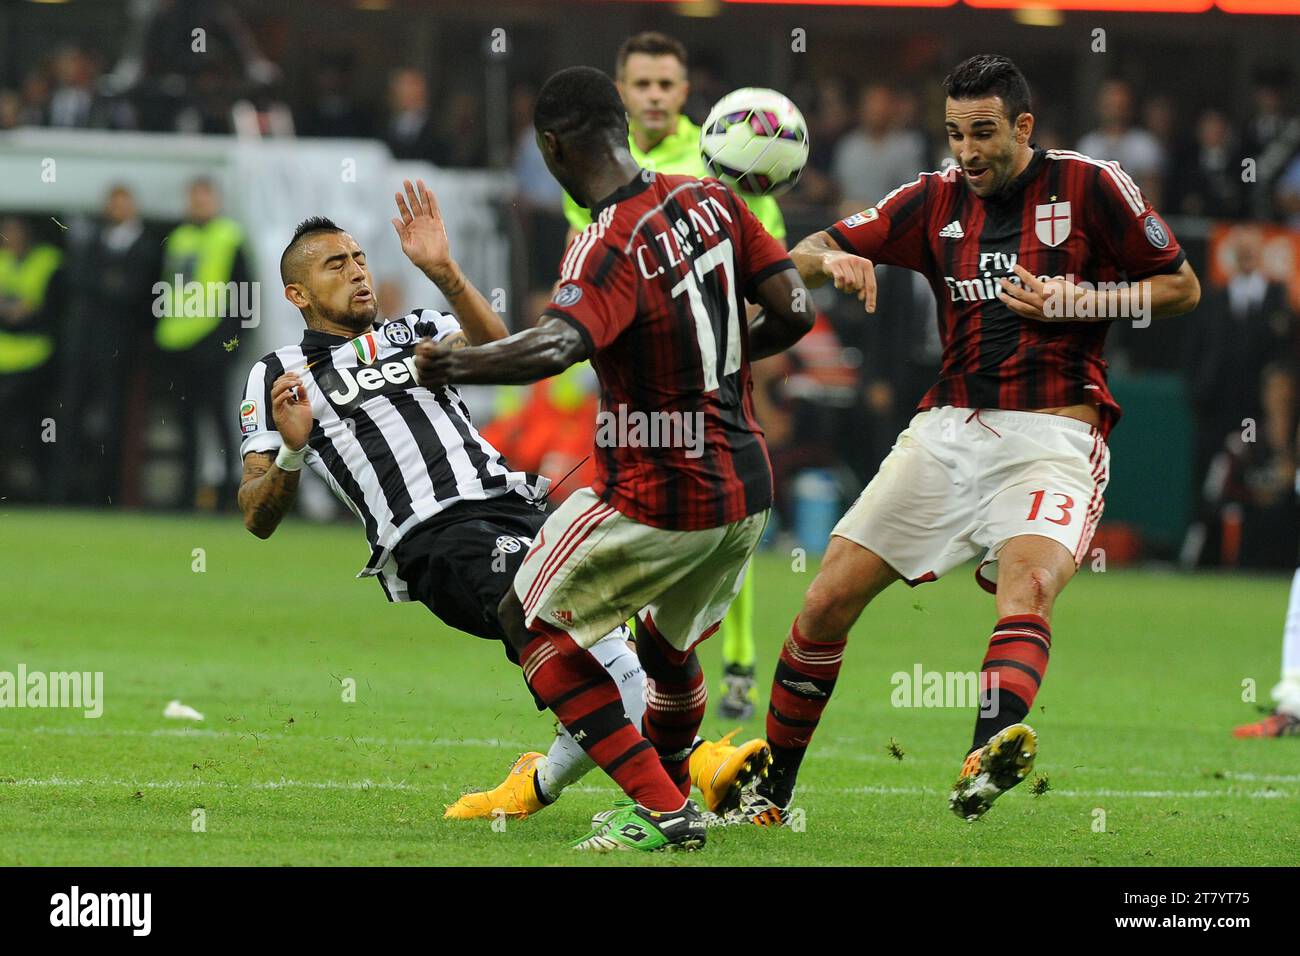 Arturo Vidal of Juventus FC vies for theball with Cristian Zapata and Adil Rami of AC Milan during the italian championship Serie A football match between AC Milan and Juventus FC on September 20, 2014 at Giuseppe Meazza Stadium in Milan, Italy. Photo Massimo Cebrelli / DPPI Stock Photo